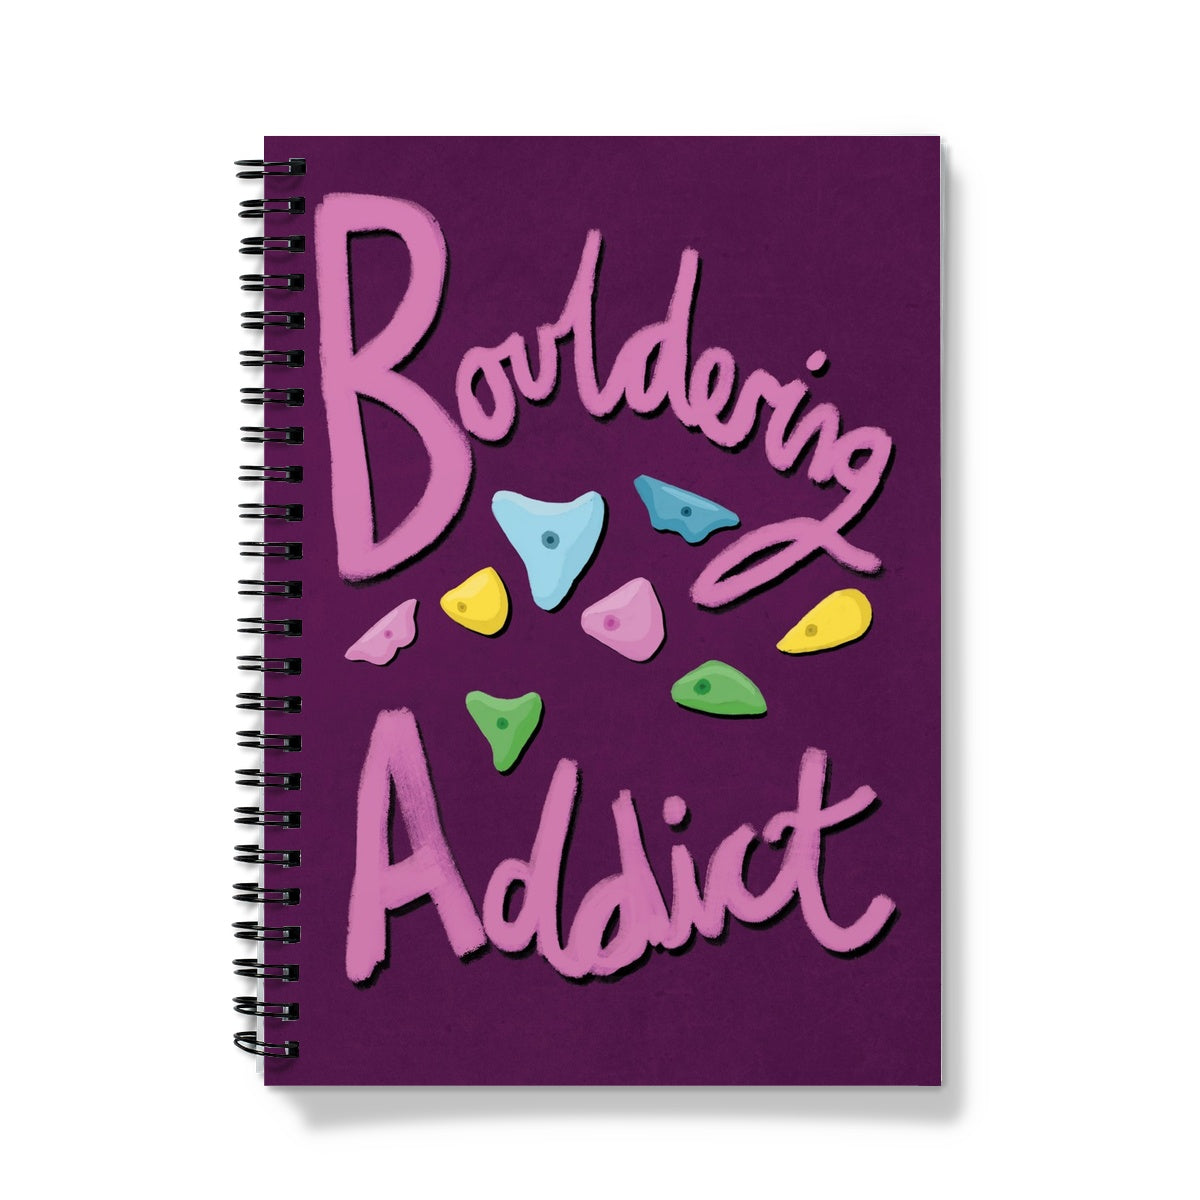 Bouldering Addict - Purple and Pink Notebook